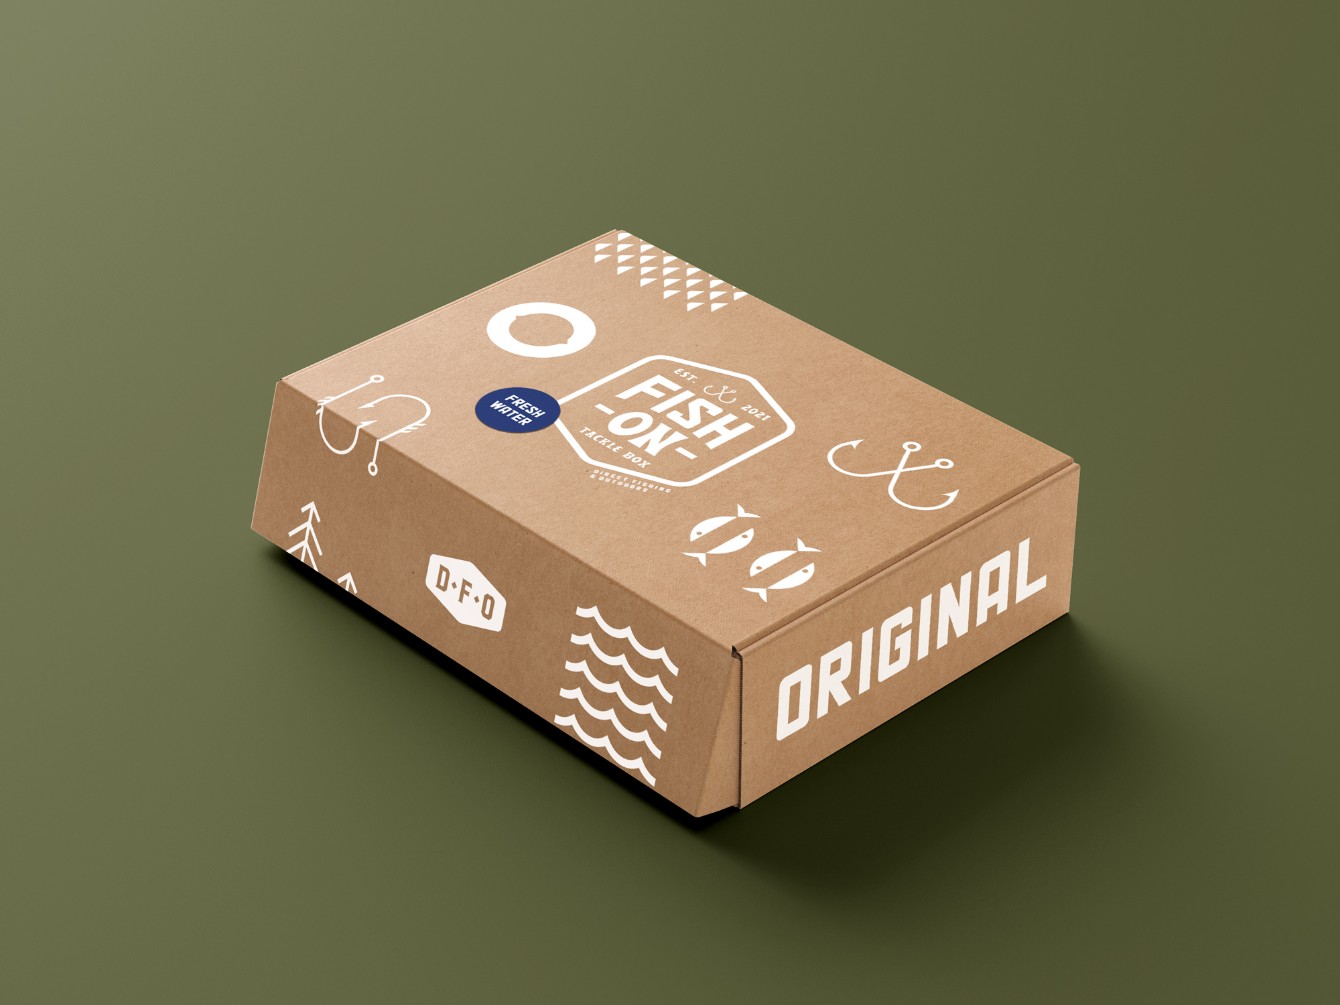 DFO product packaging design by Kaliber Studio